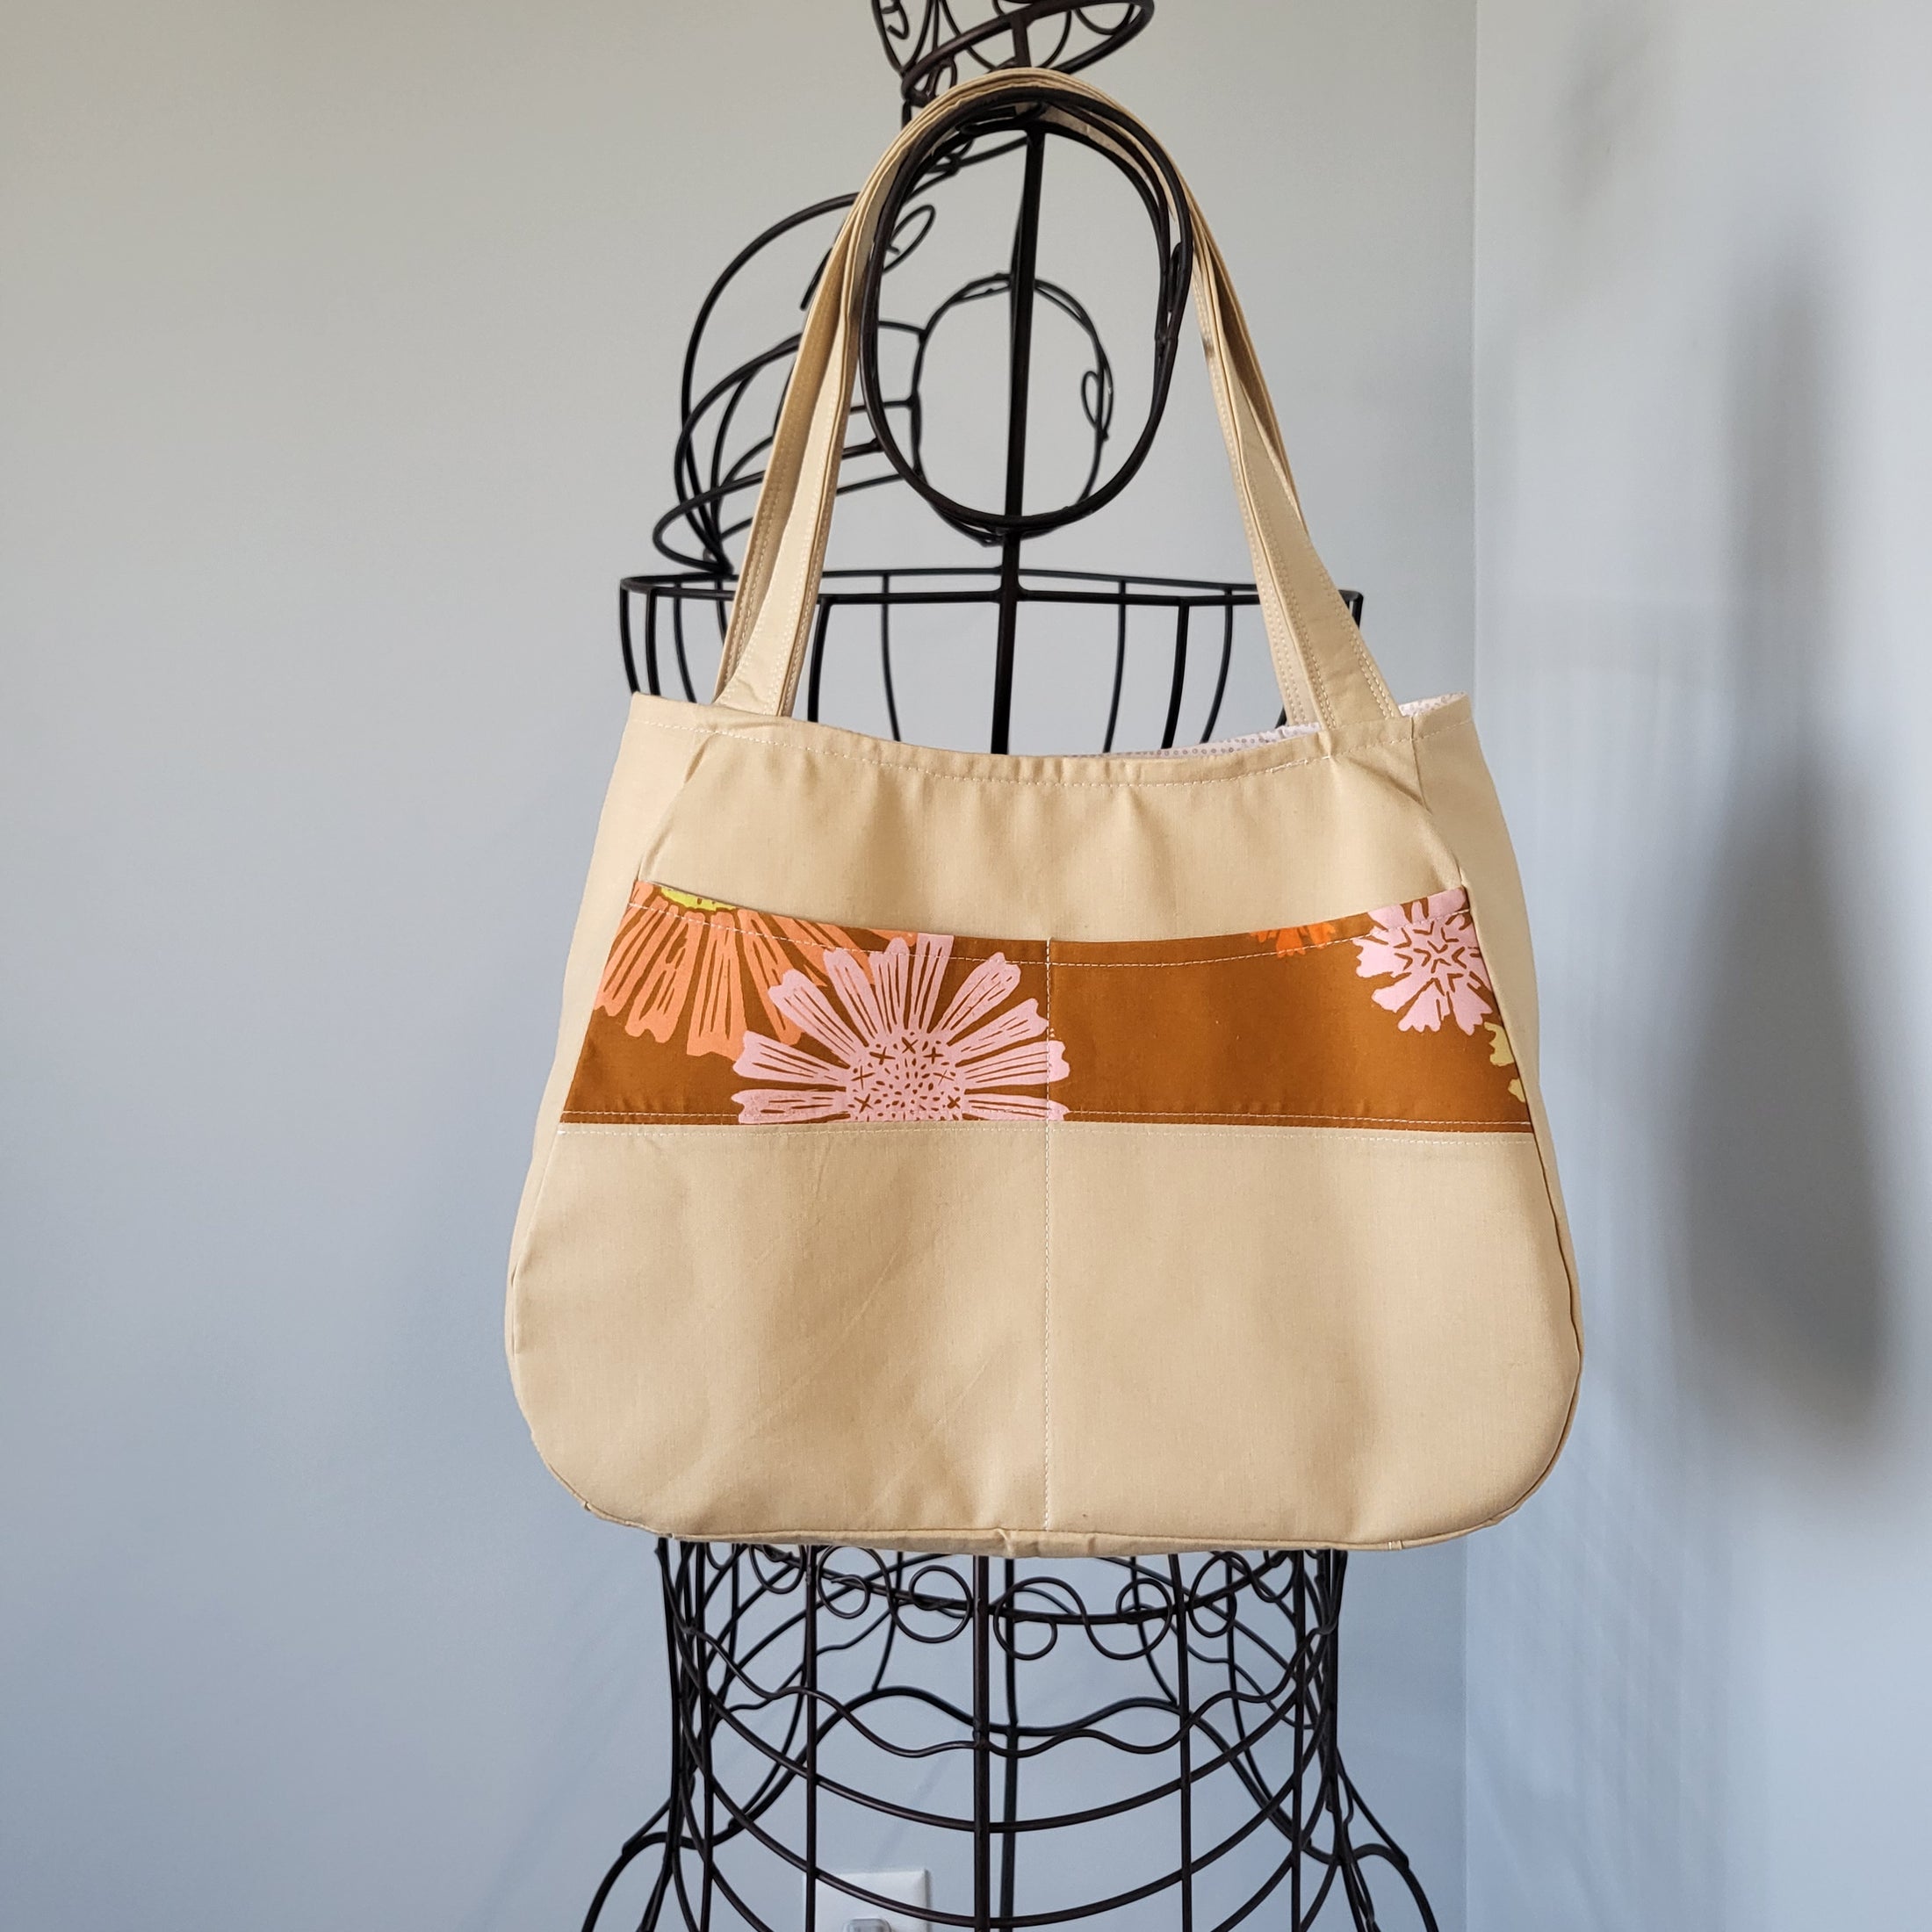 Let the sunshine in fabric tote bag hanging on metal dress form. 